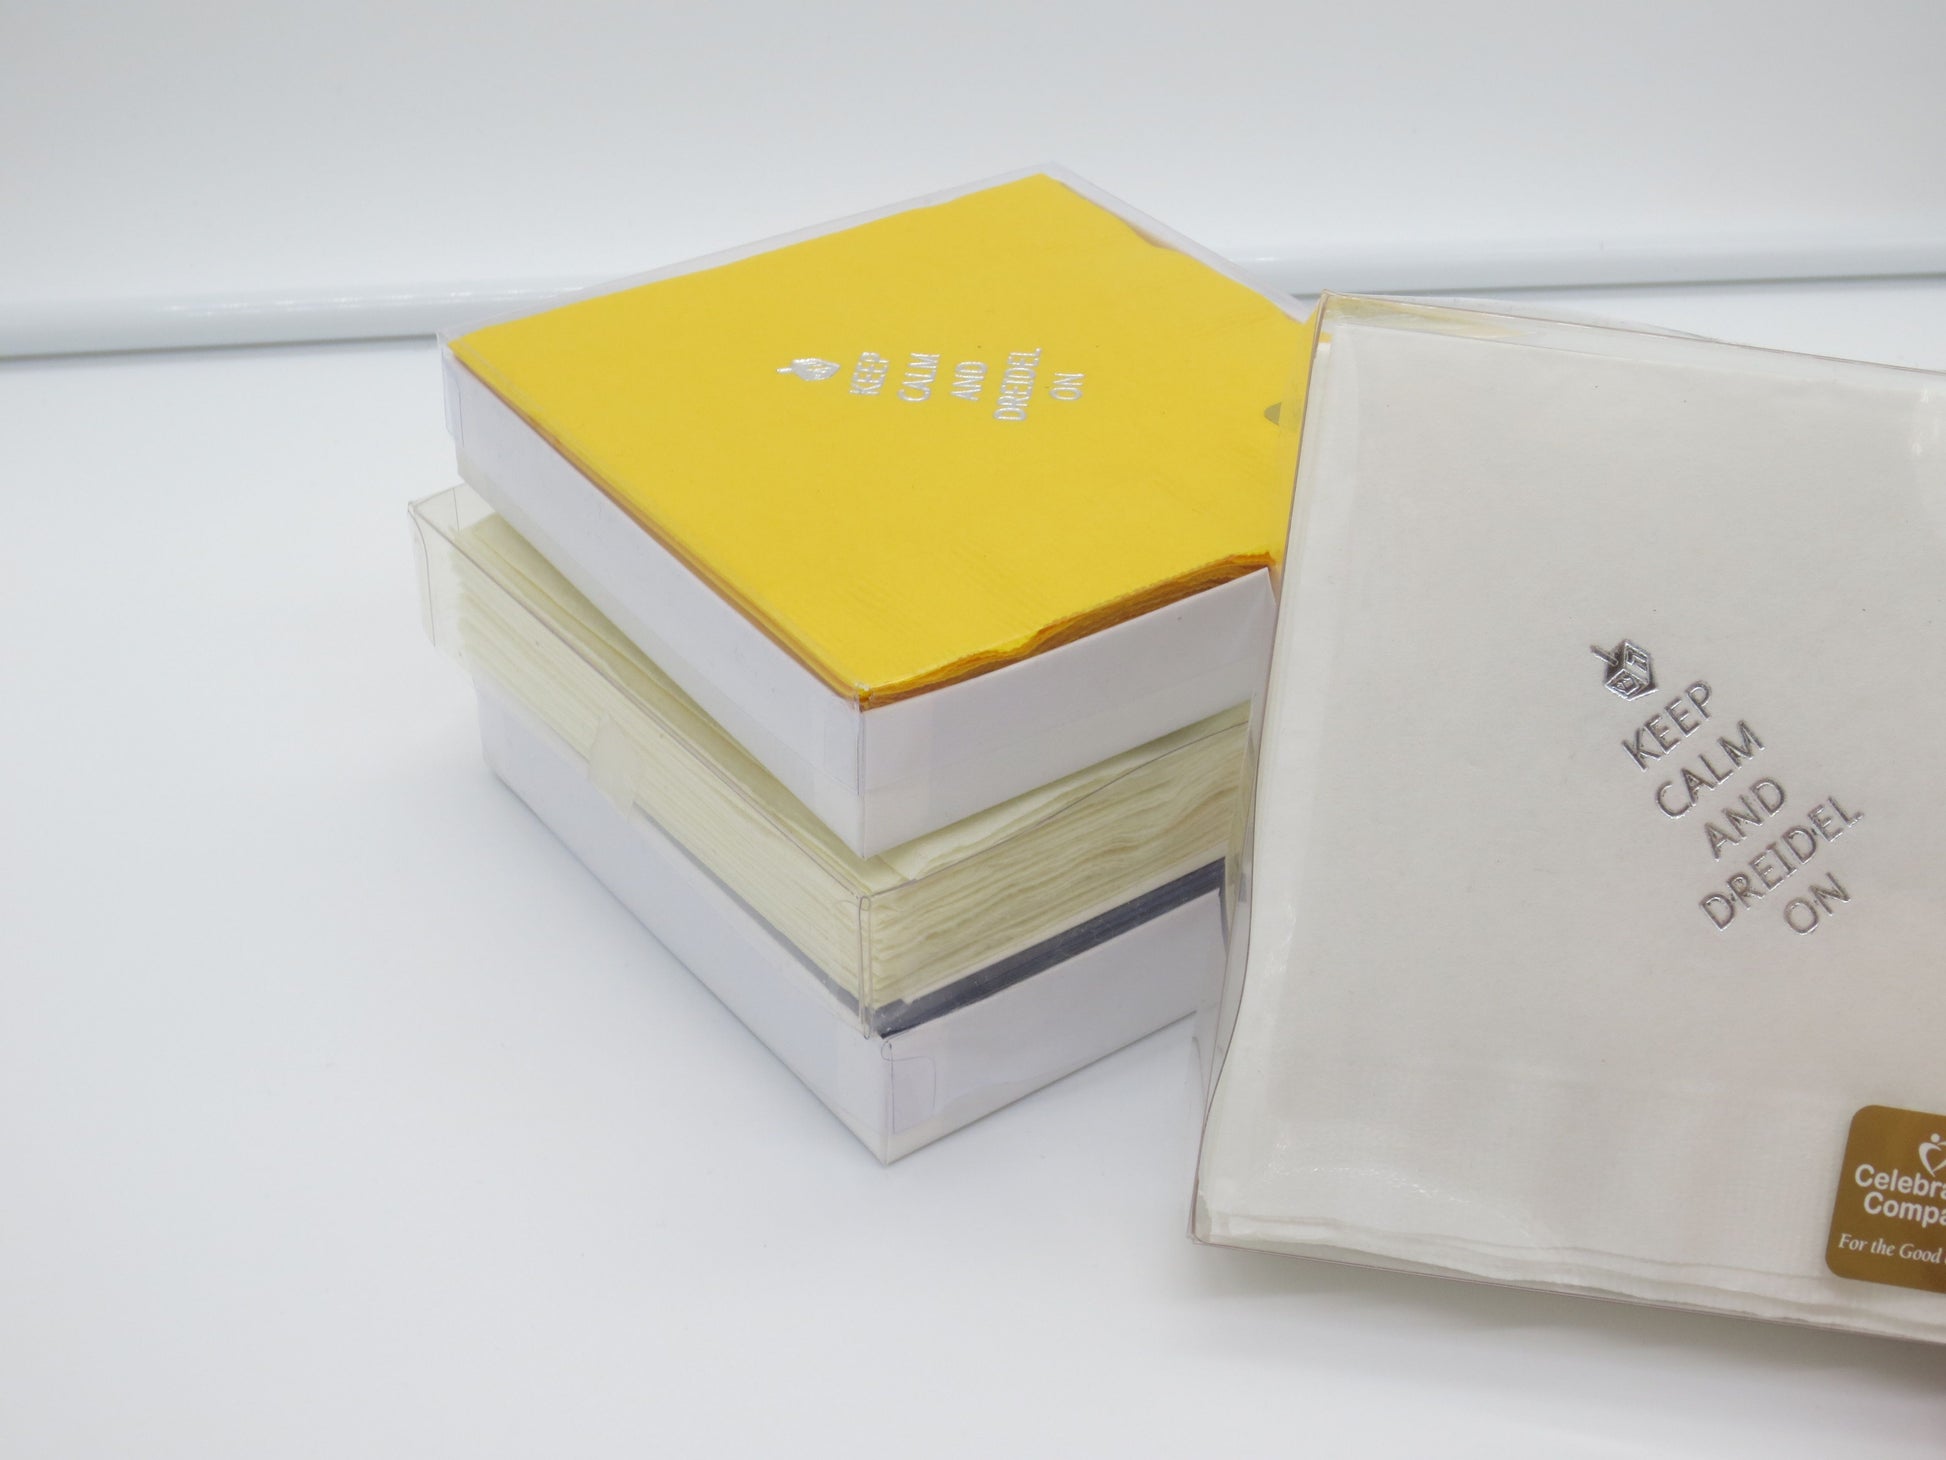 Packaged white and yellow cocktail napkins with silver dreidel and Keep Calm and Dreidel On slogan